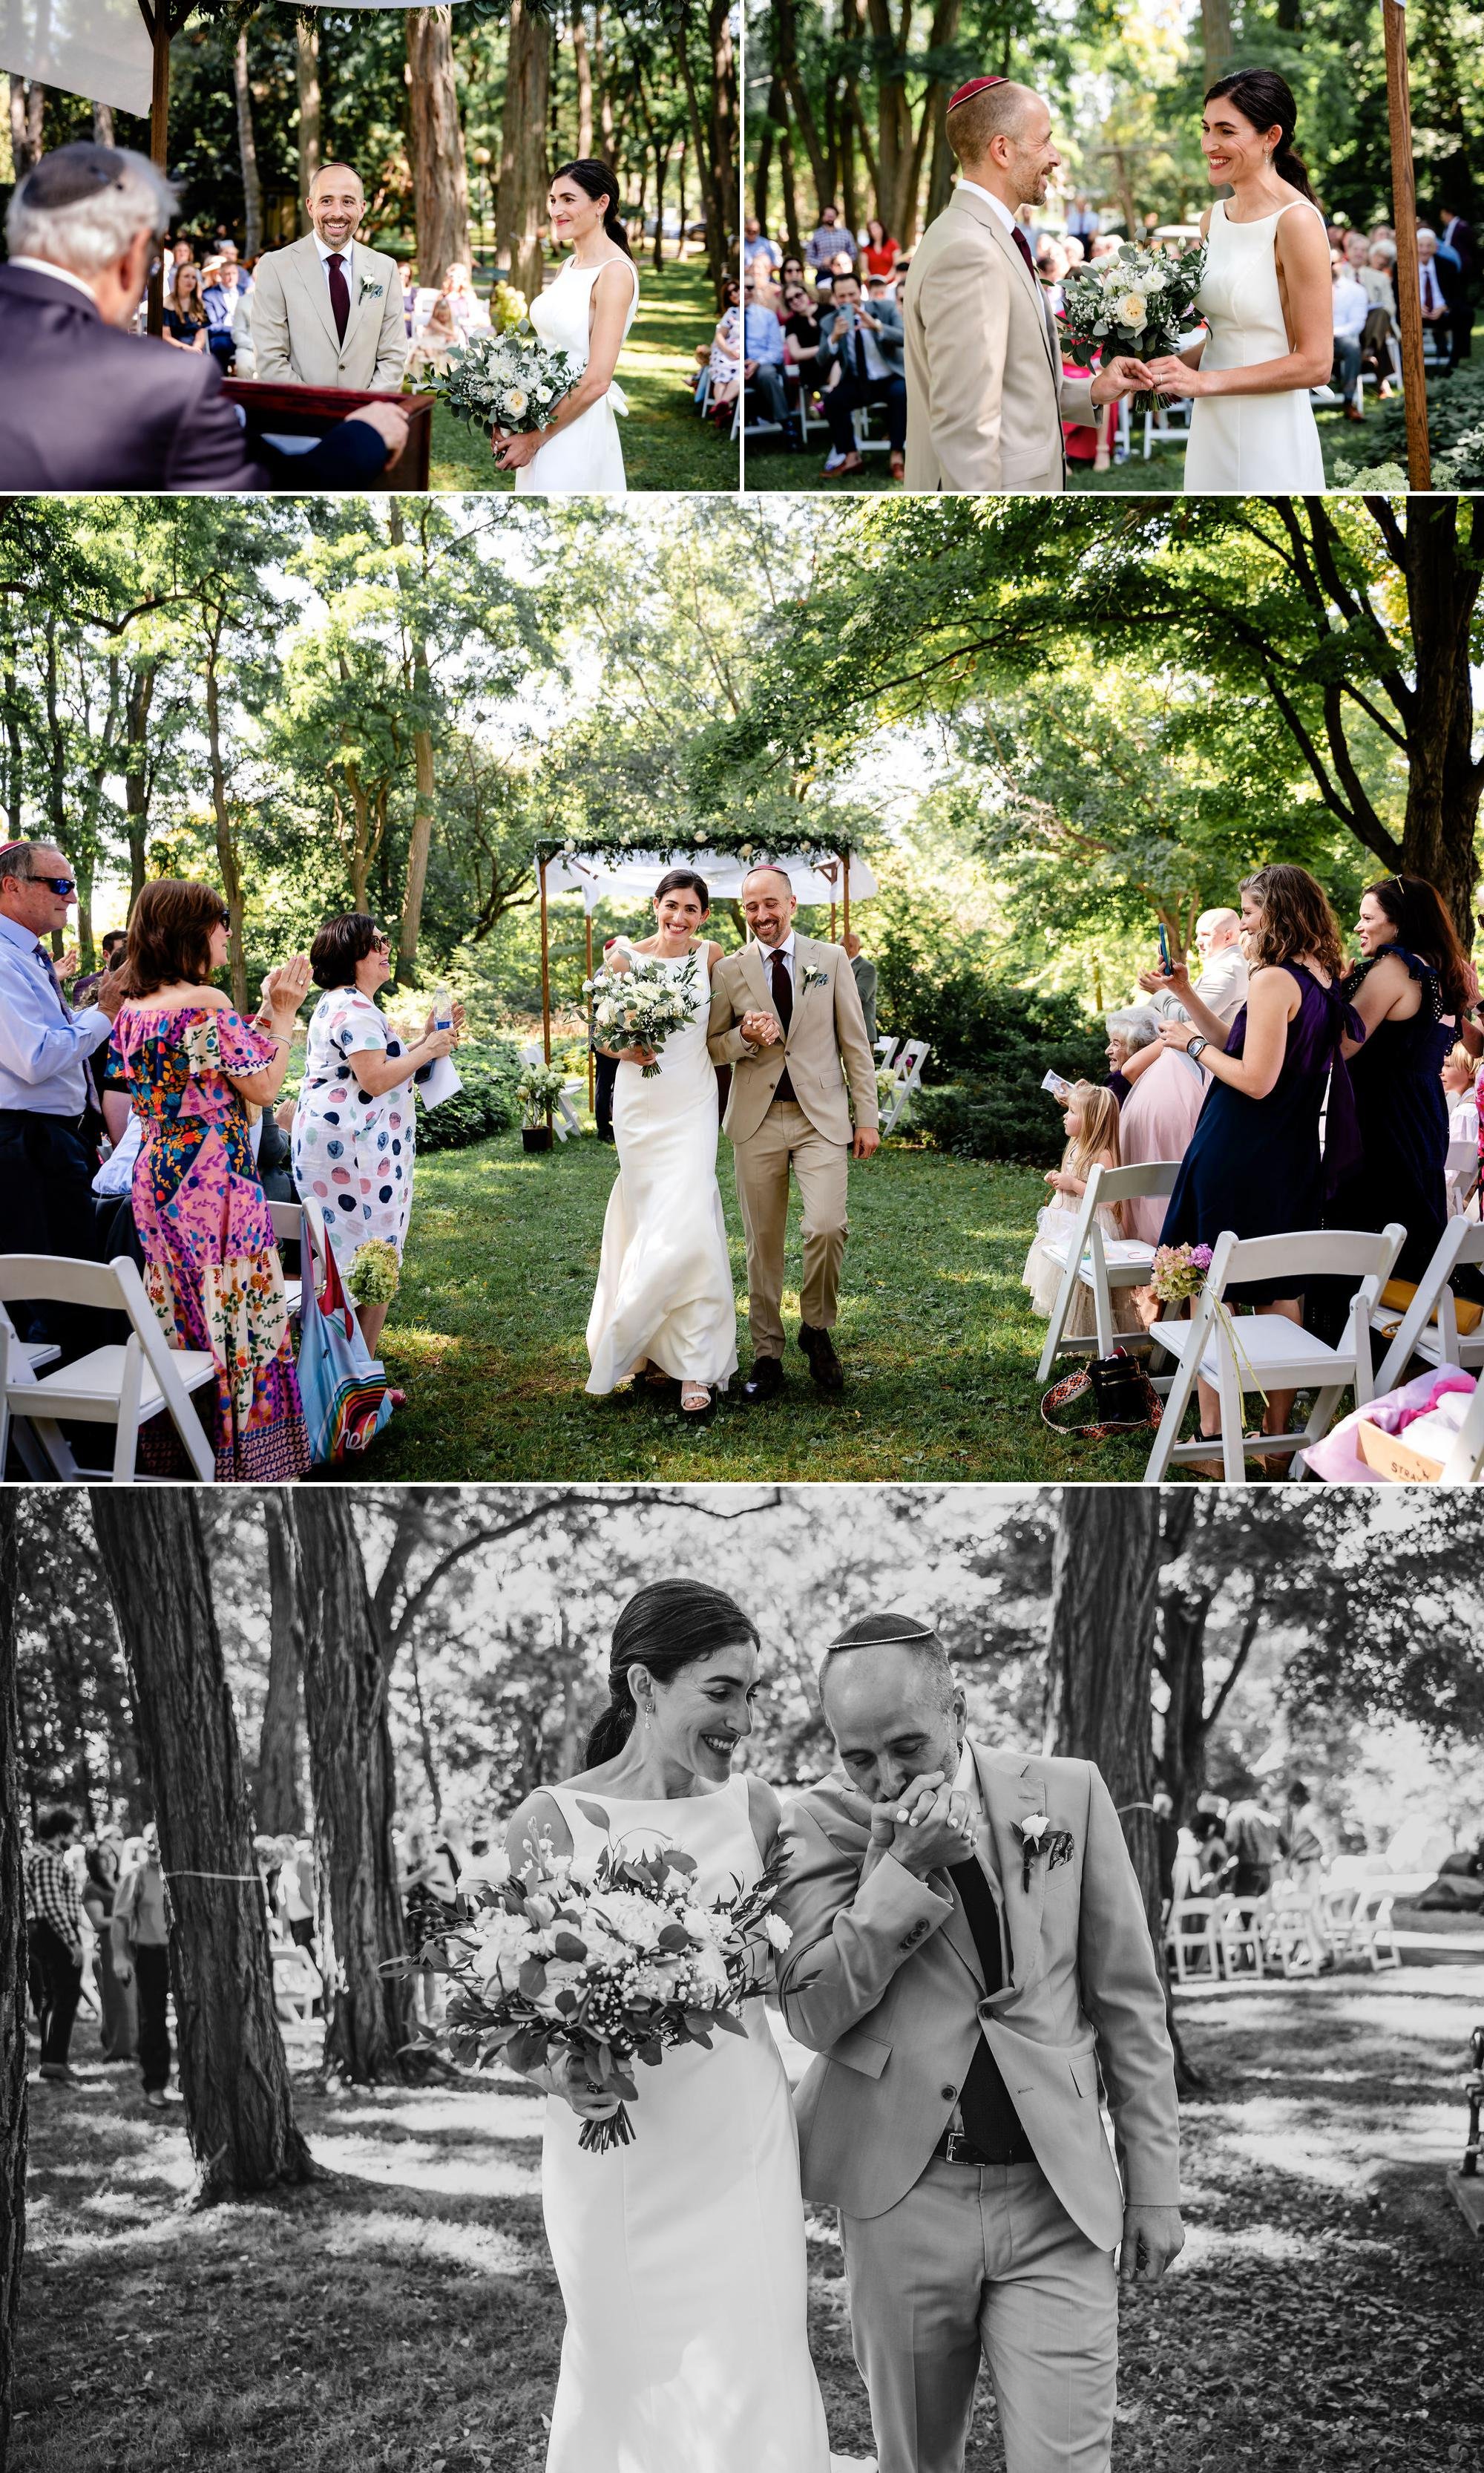 photographs from an outdoor wedding ceremony at rockcliffe park in ottawa